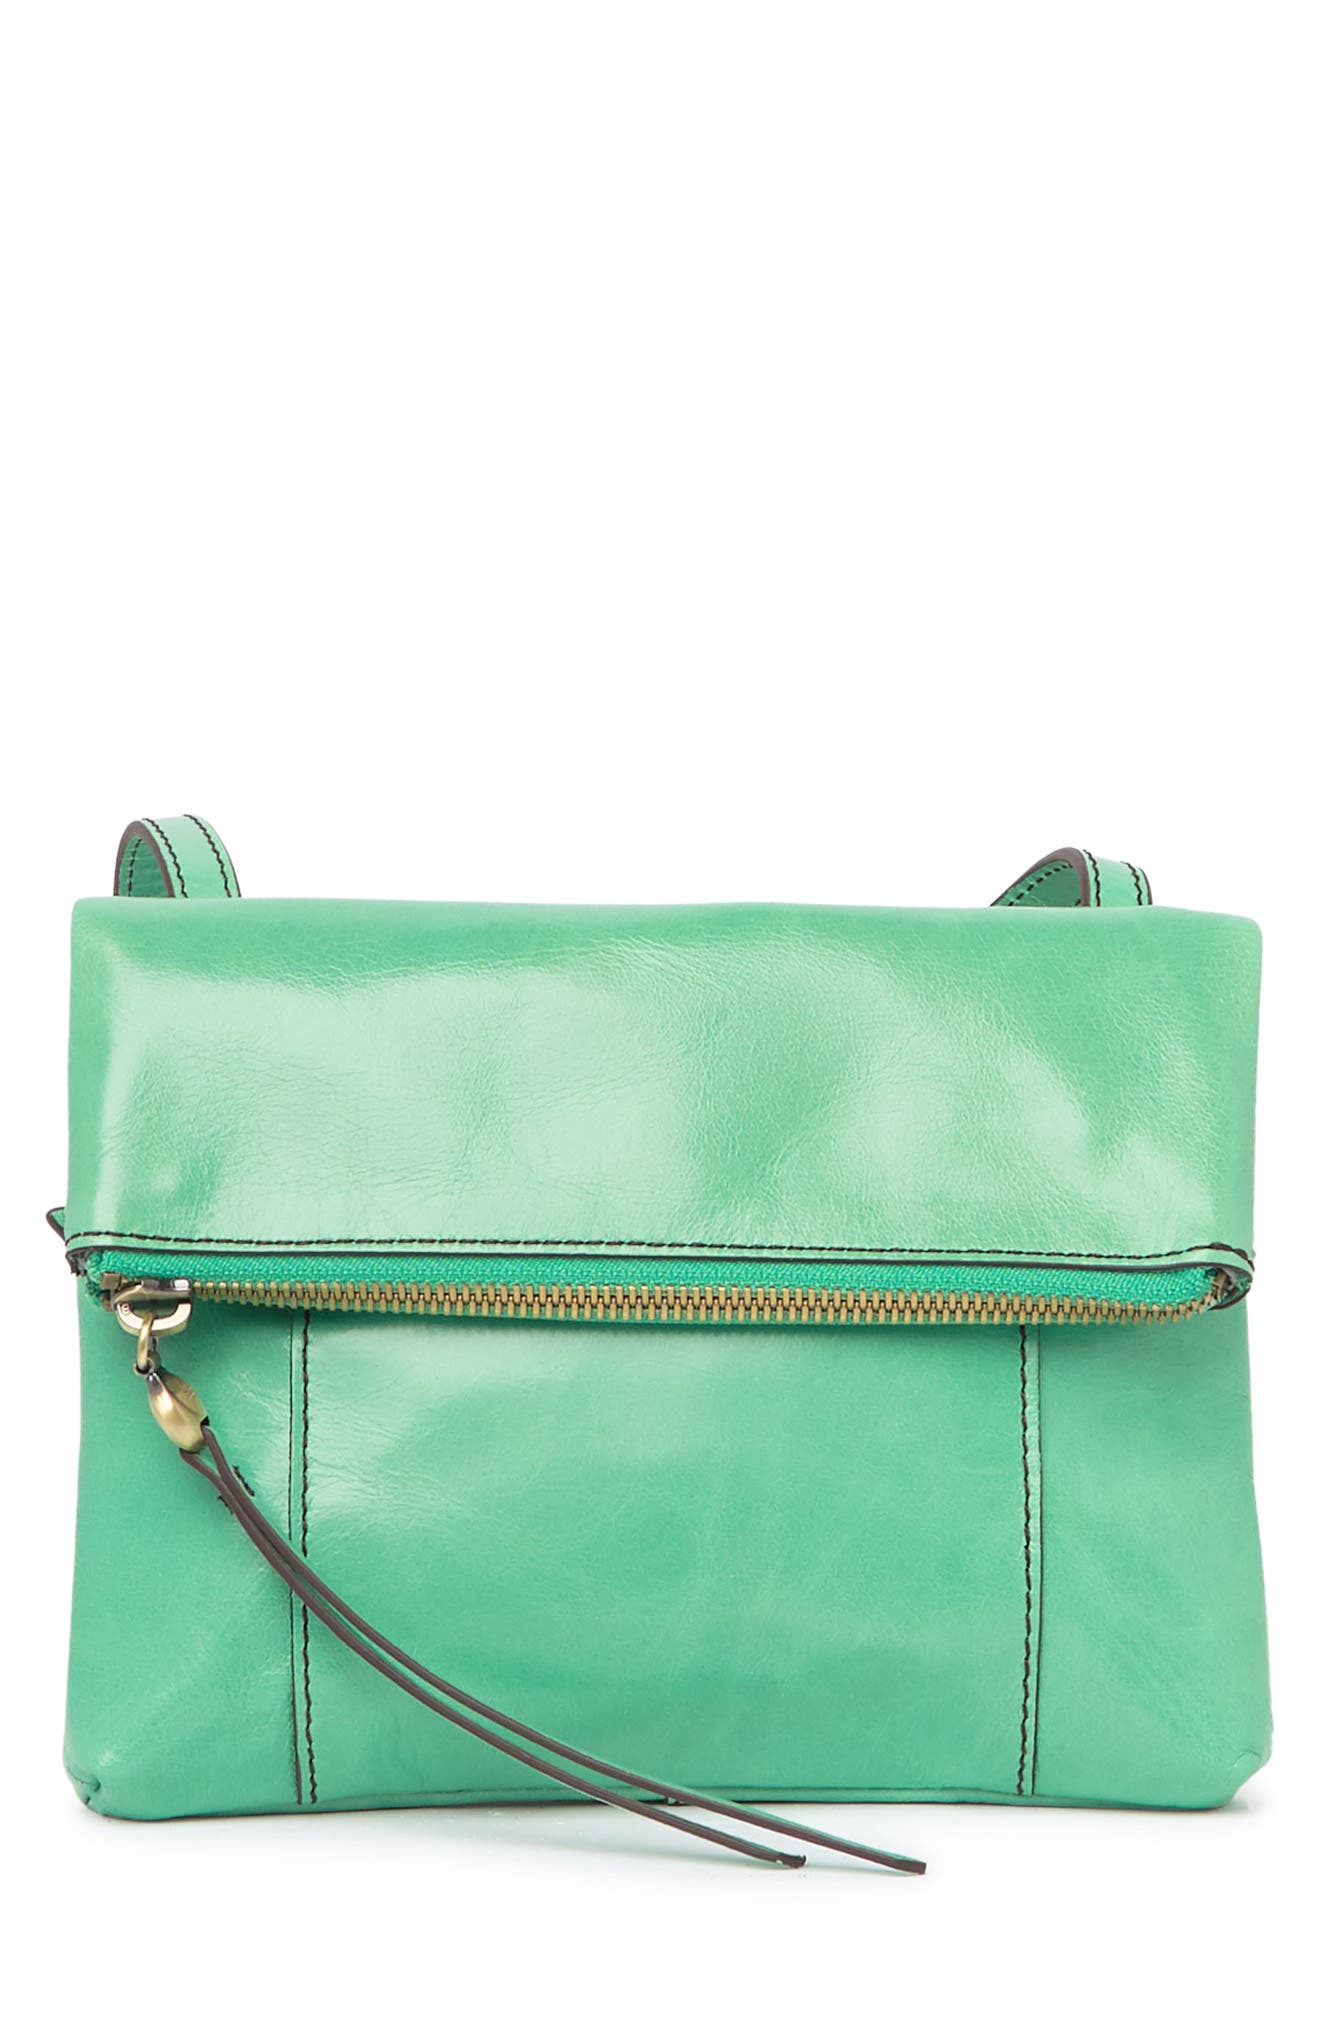 Hobo Sparrow Leather Crossbody Bag In Mint